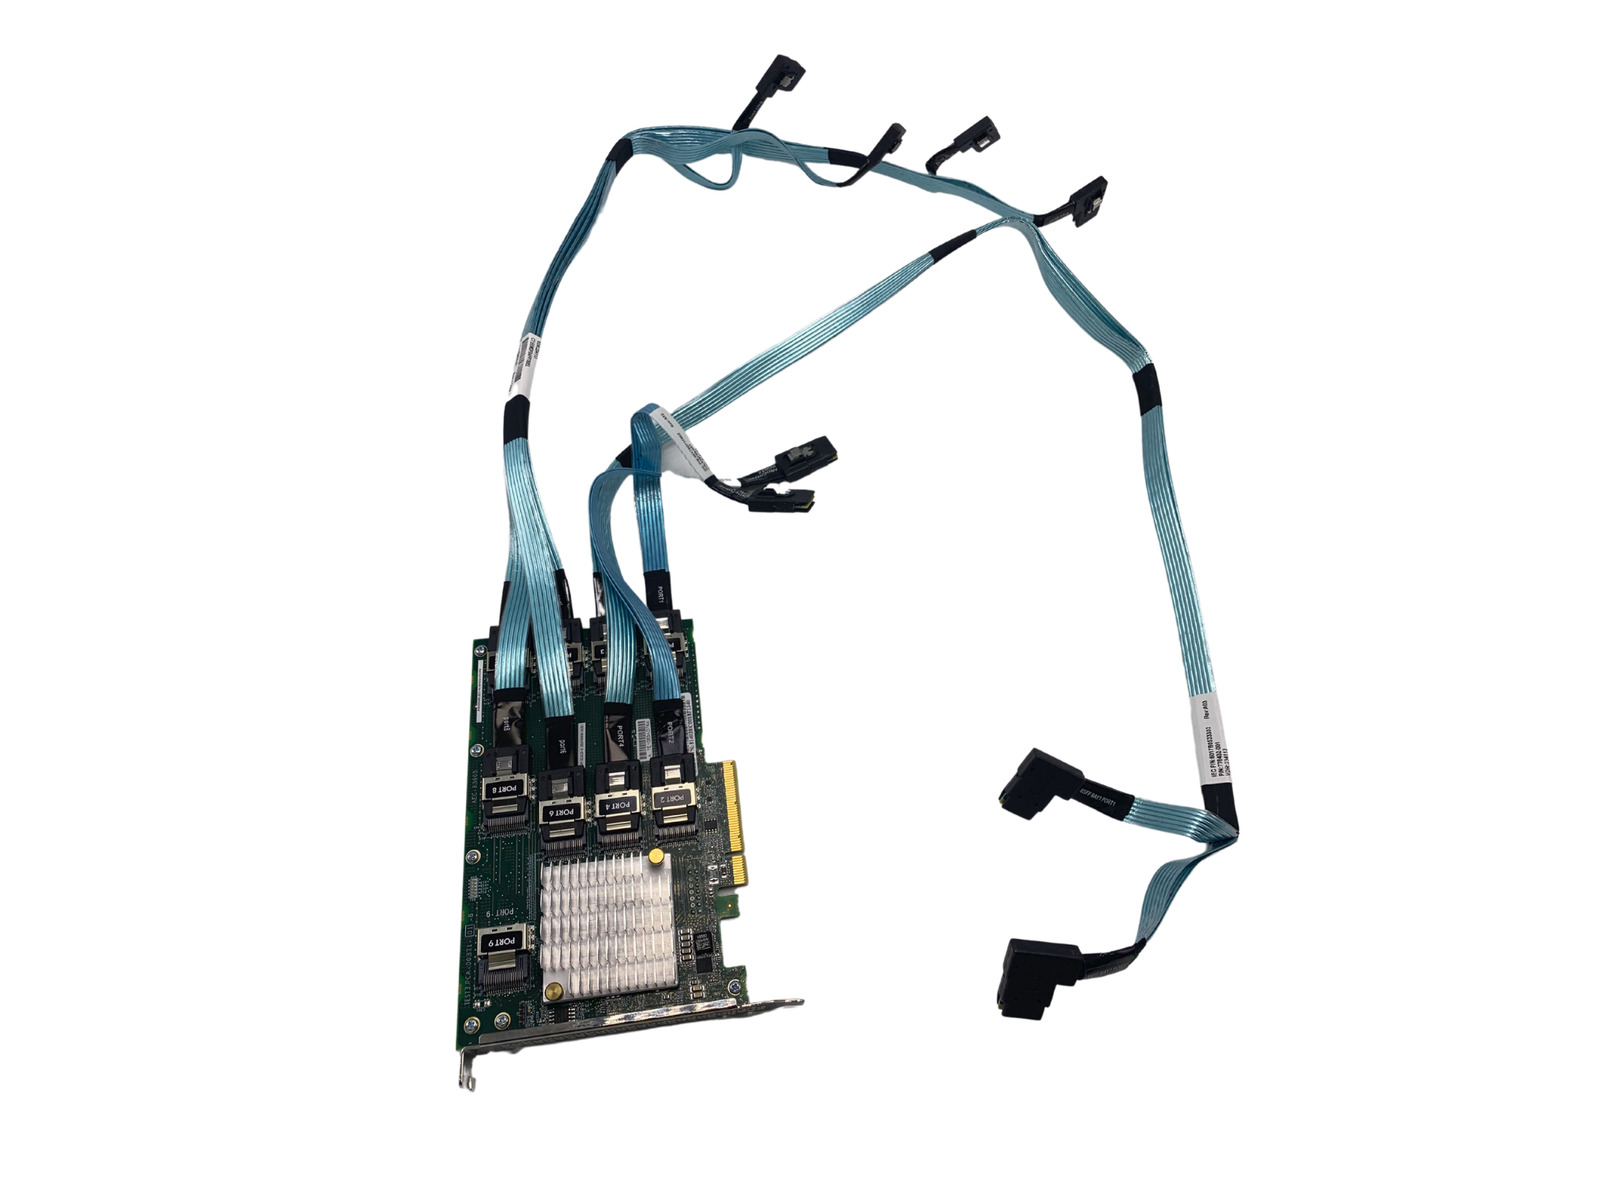 Hpe 870549-B21 DL38X G10 12G SAS Expander Card with Cables